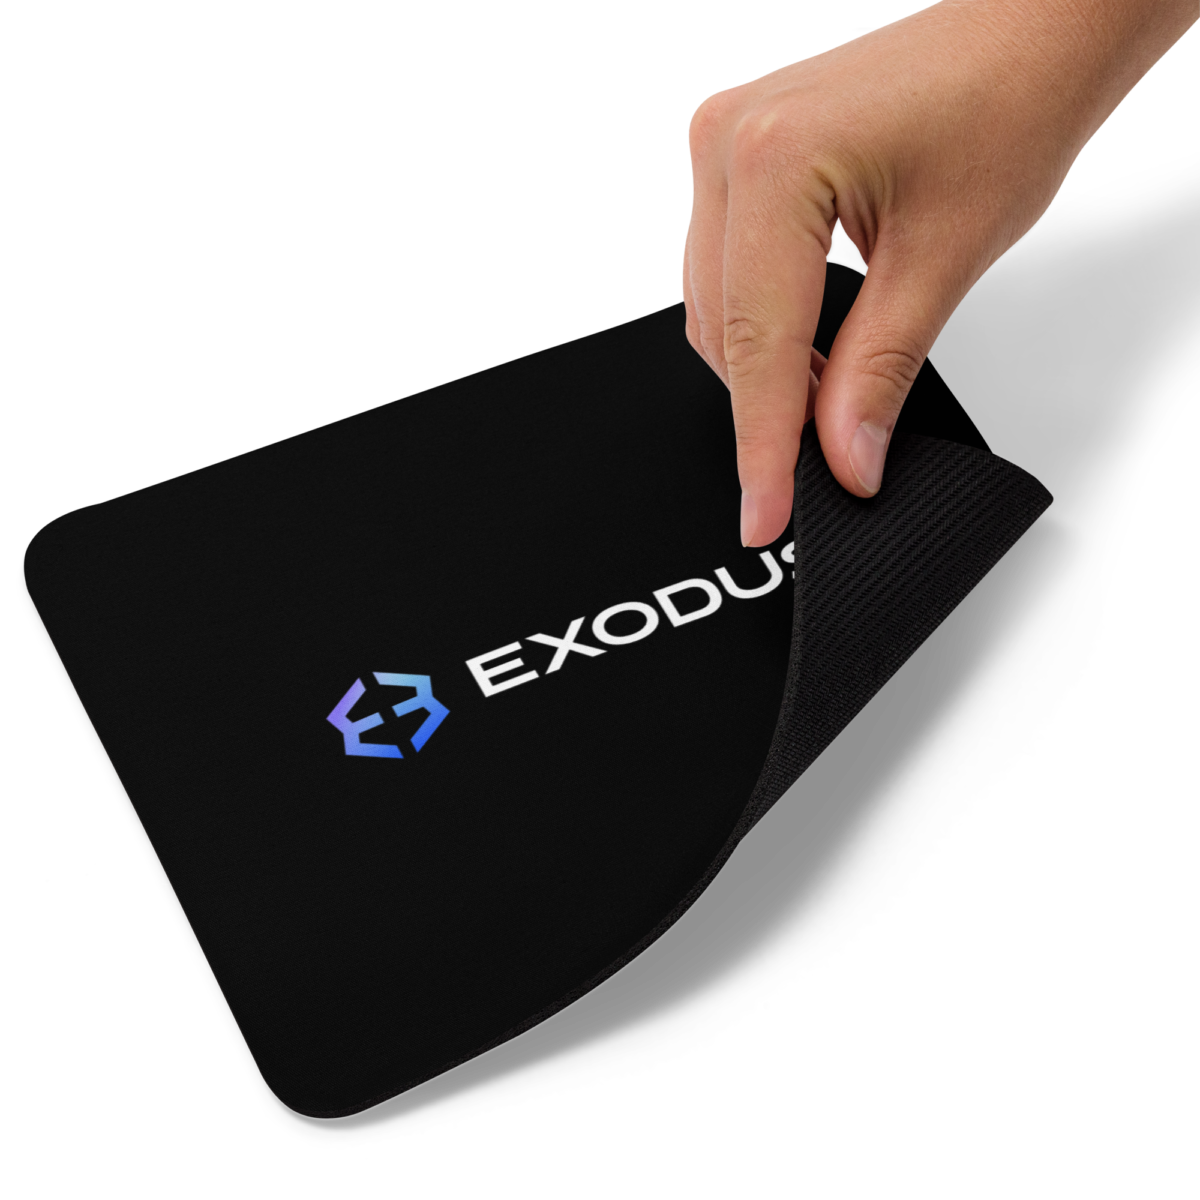 mouse pad white product details 63172e08be935 - Exodus Mouse Pad